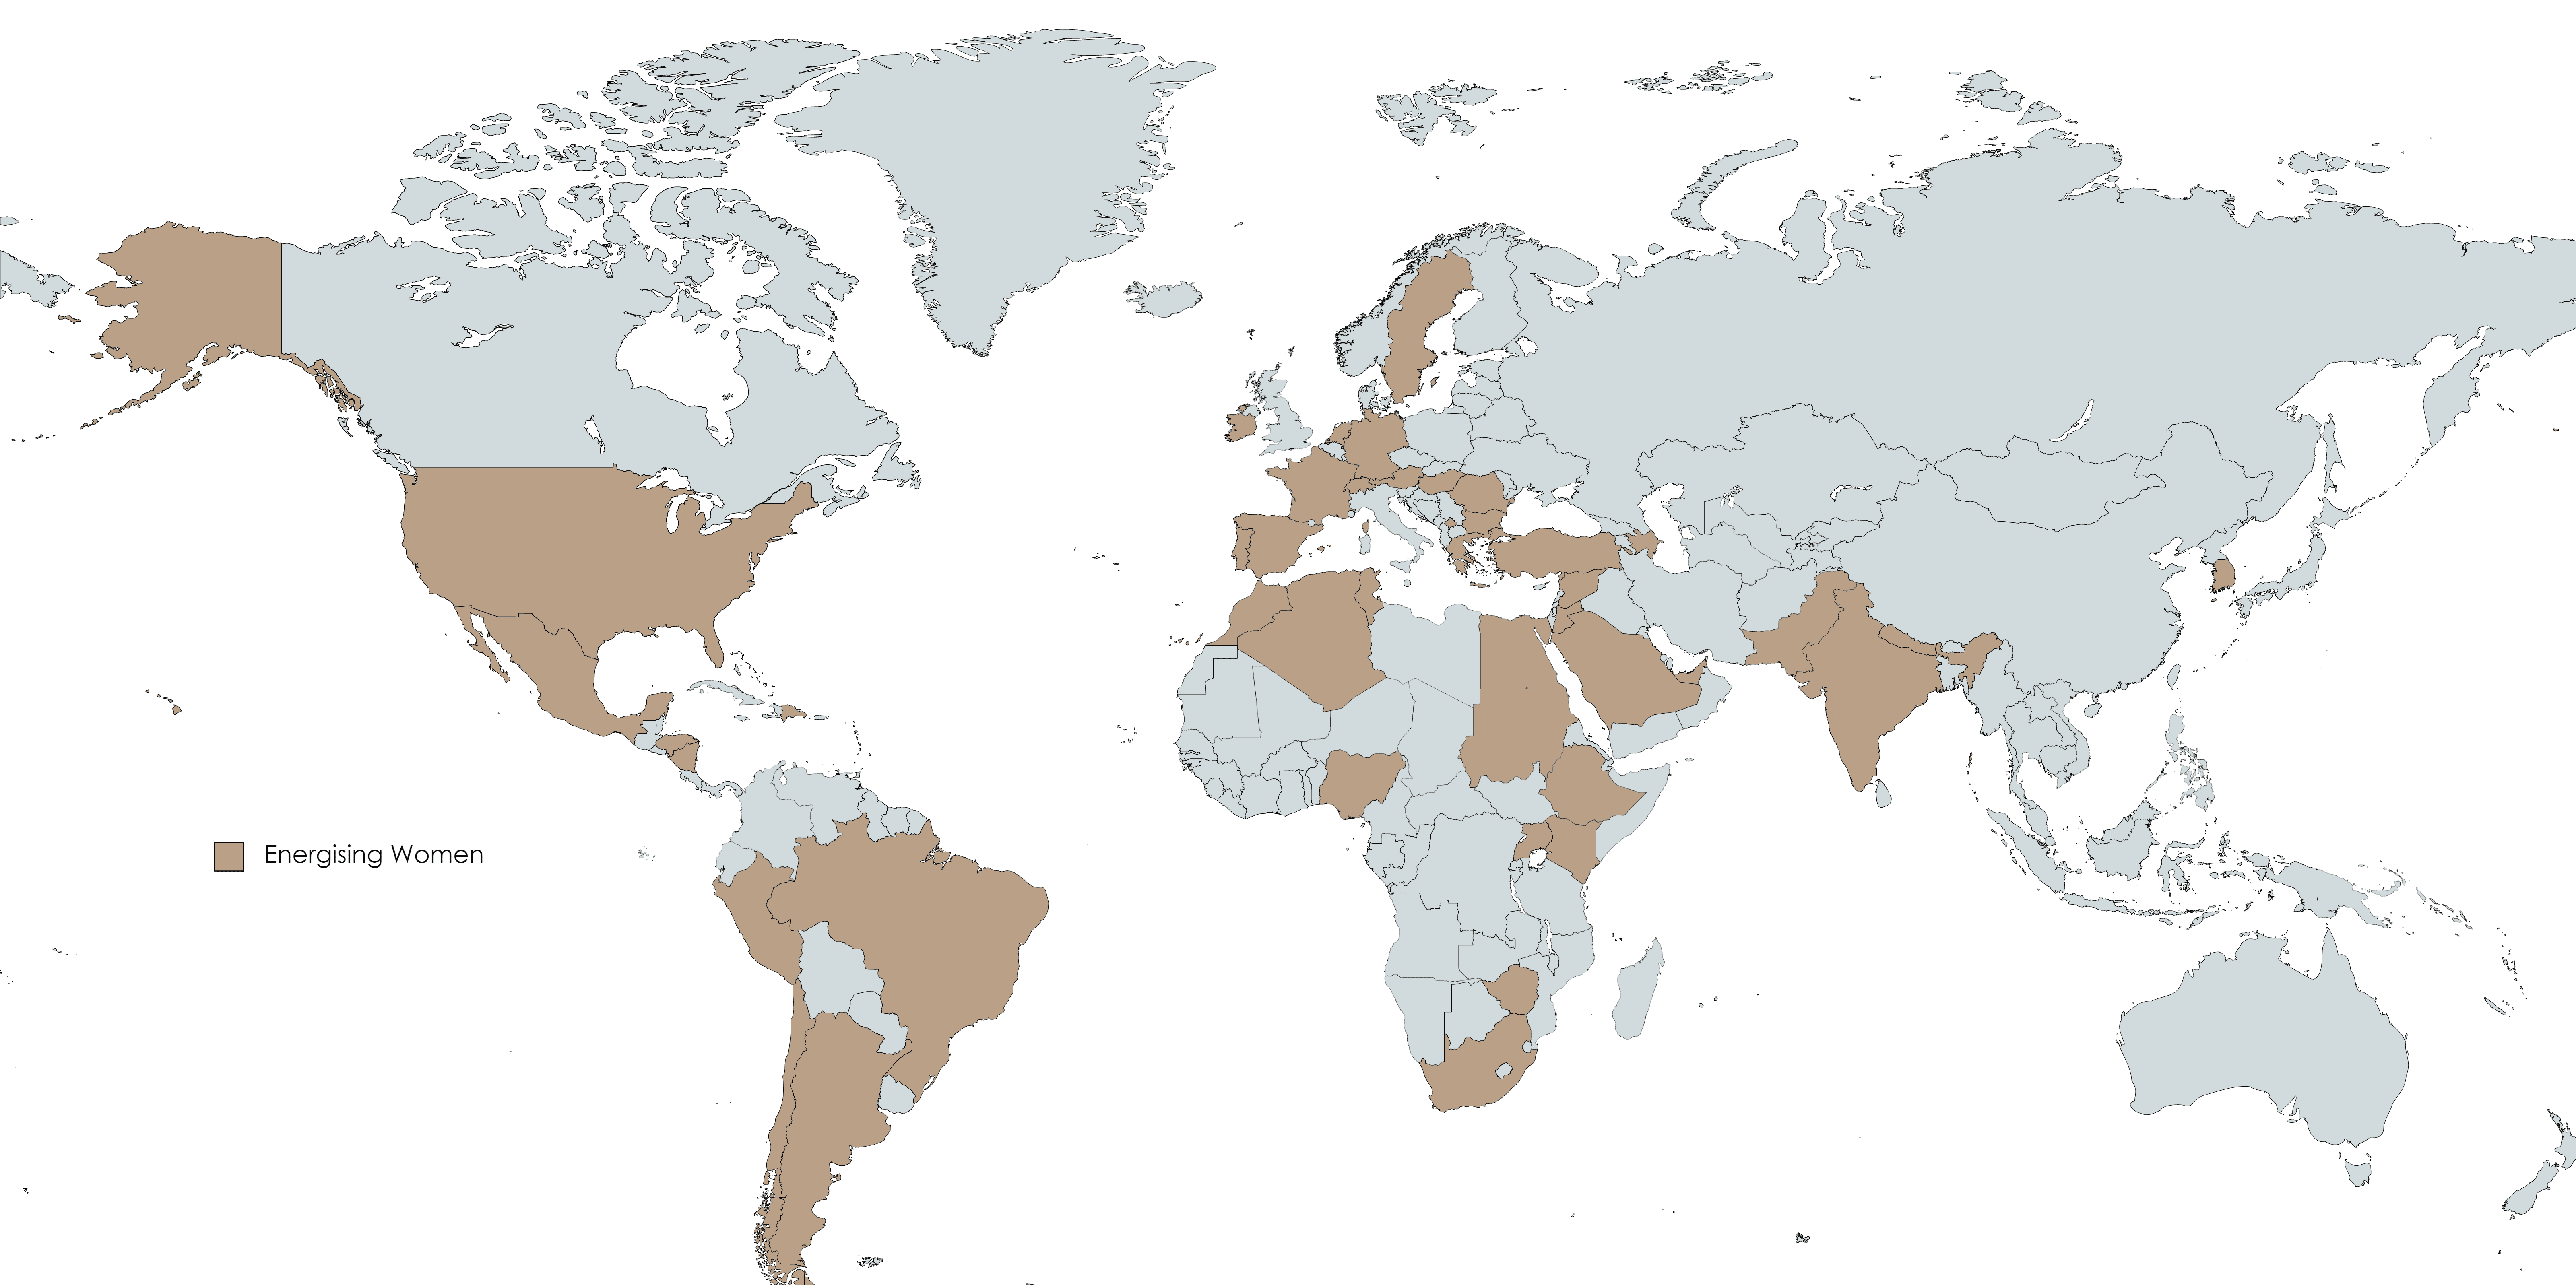 Map of the world with mentor countries highlighted